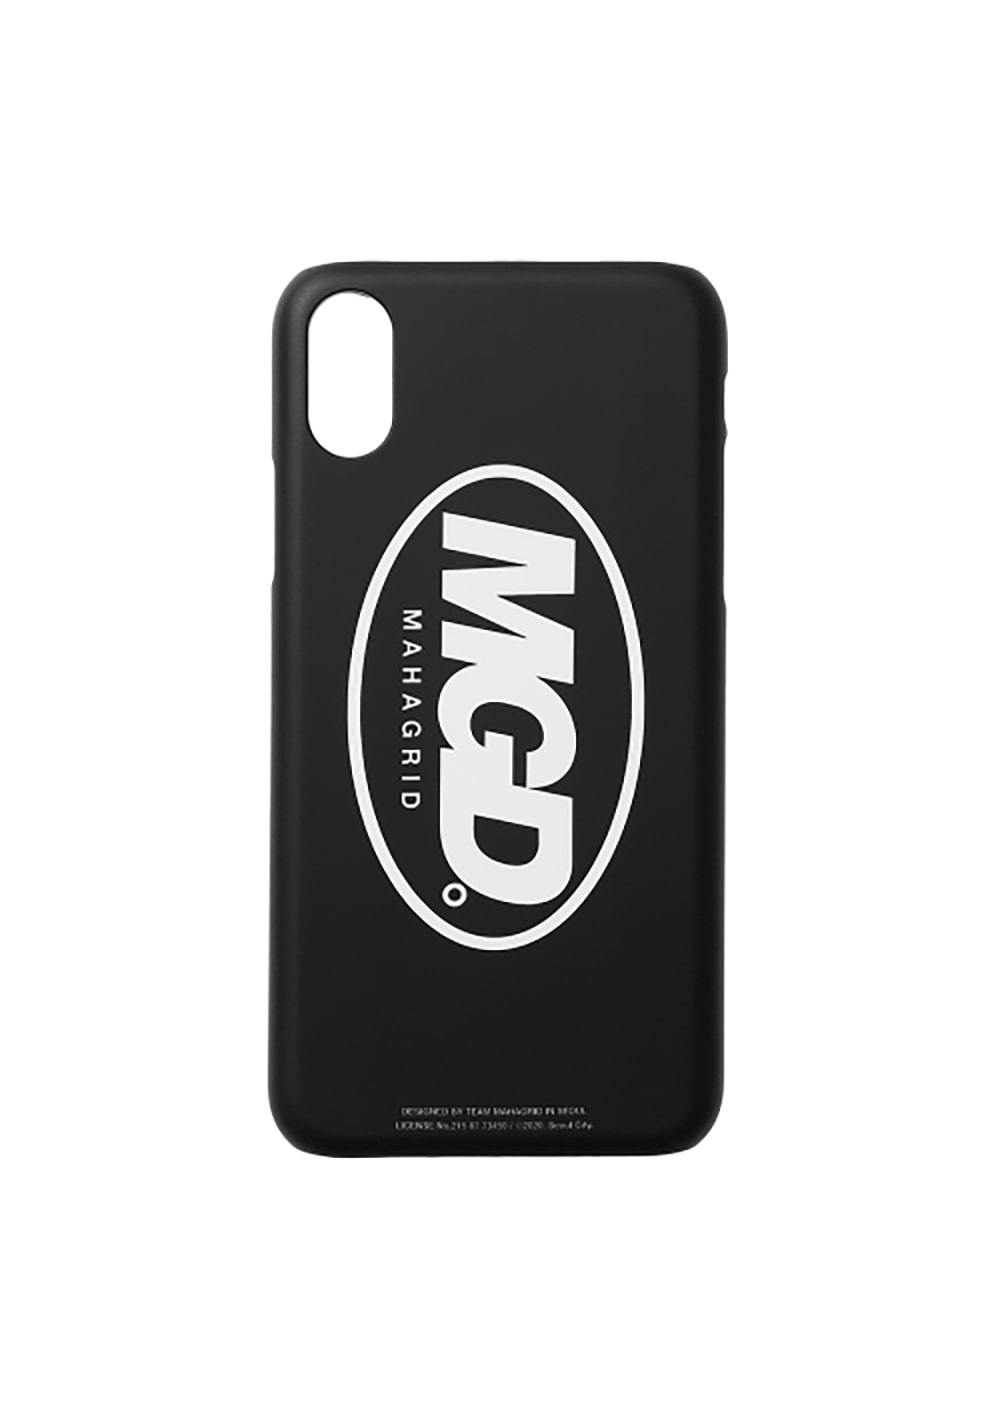 MH_iPHONE XS CASE